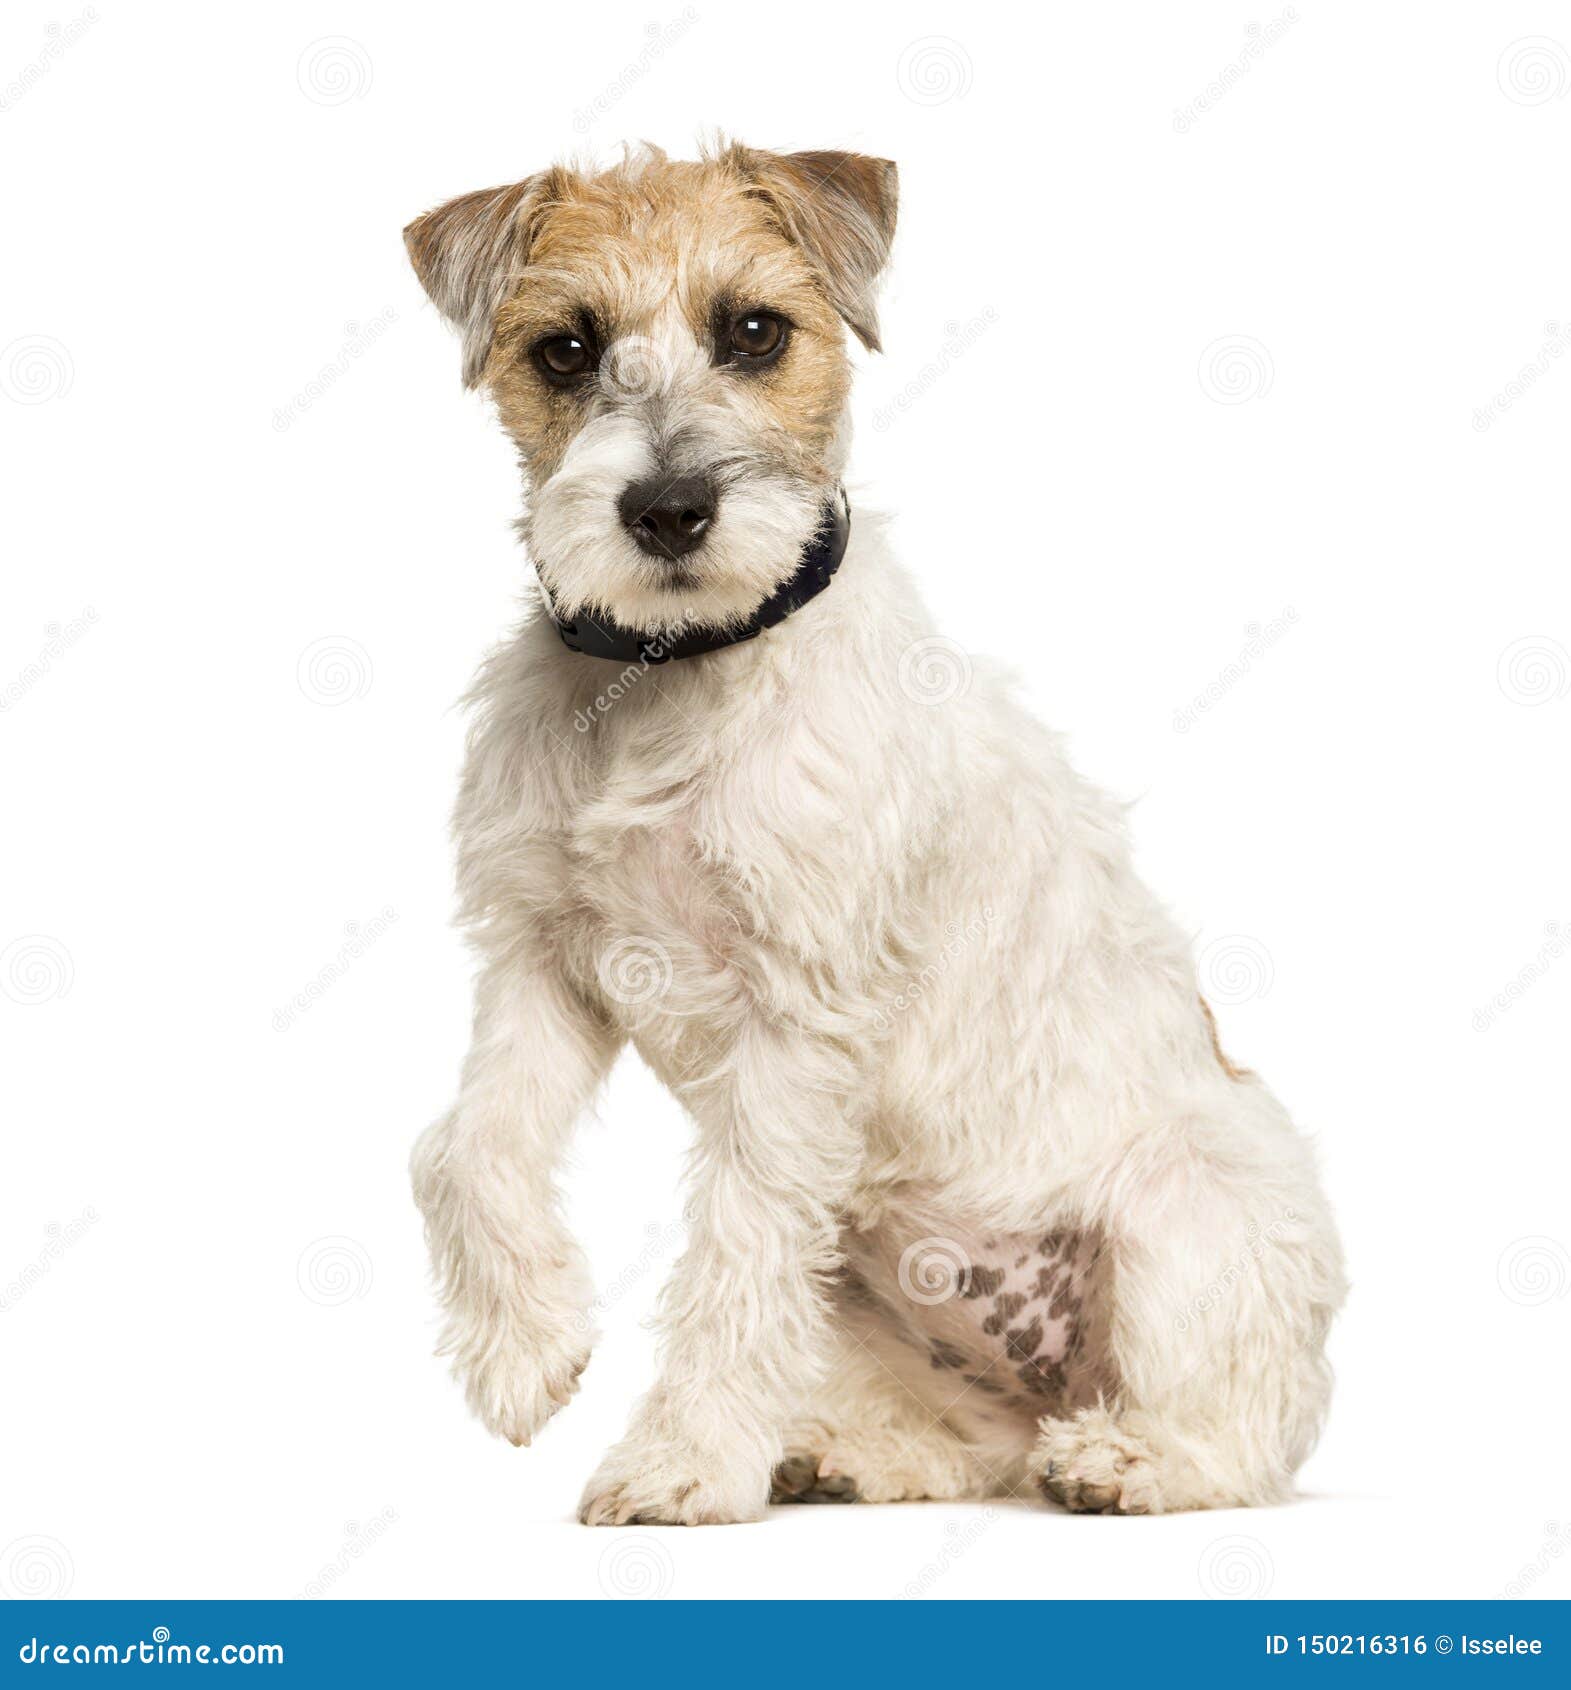 1 226 White Parson Russell Terrier Photos Free Royalty Free Stock Photos From Dreamstime